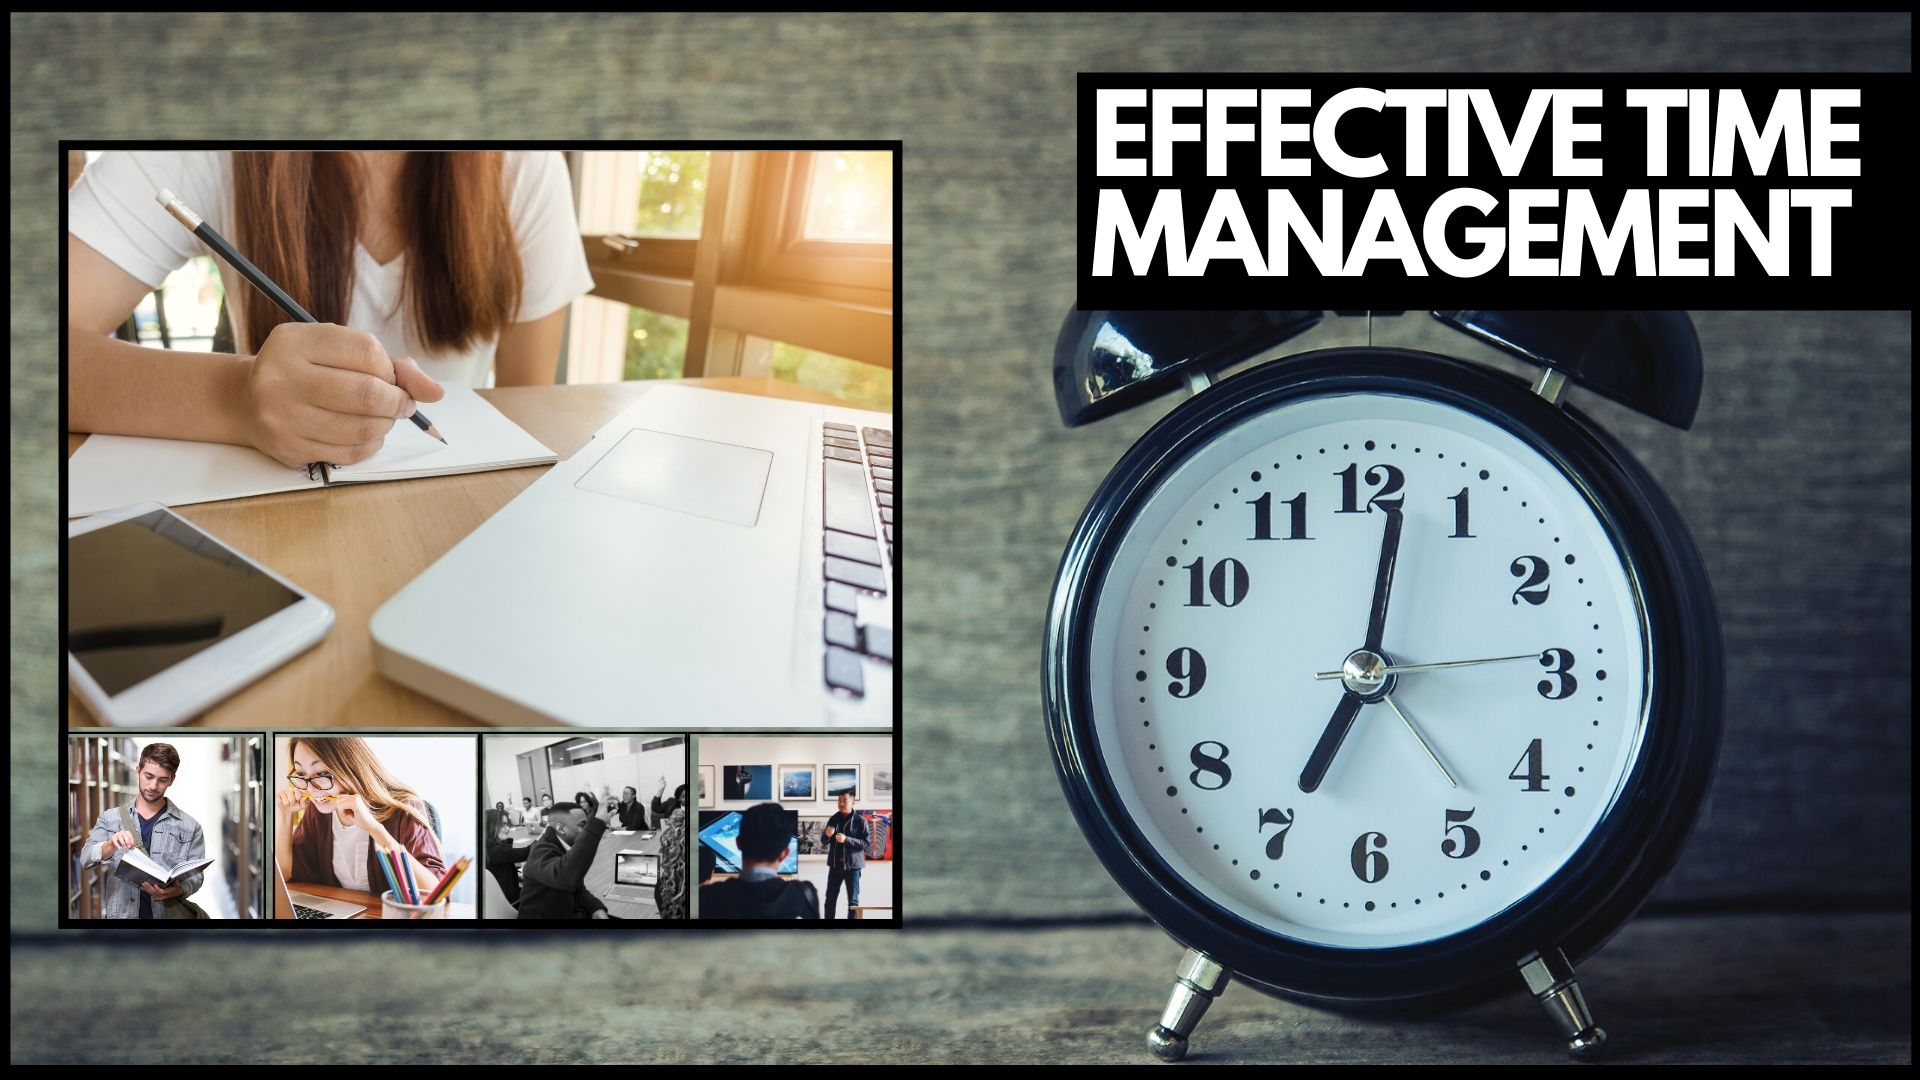 You are currently viewing EFFECTIVE TIME MANAGEMENT